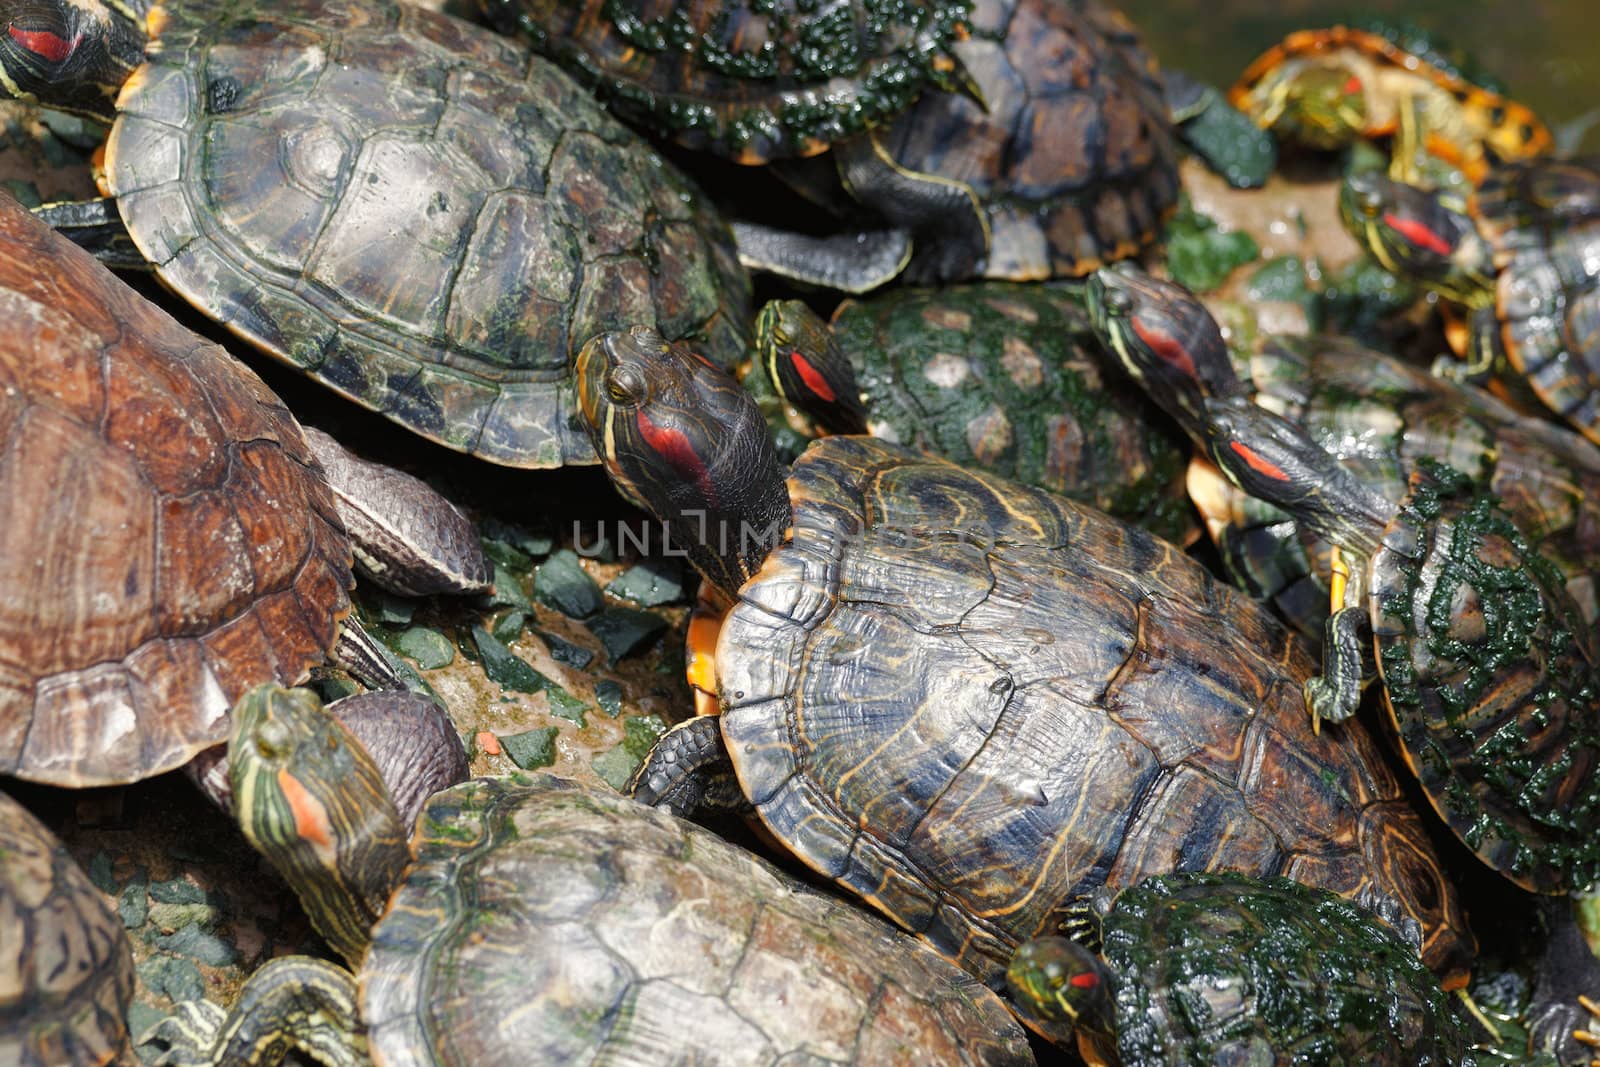 tortoises crowded together by clearviewstock